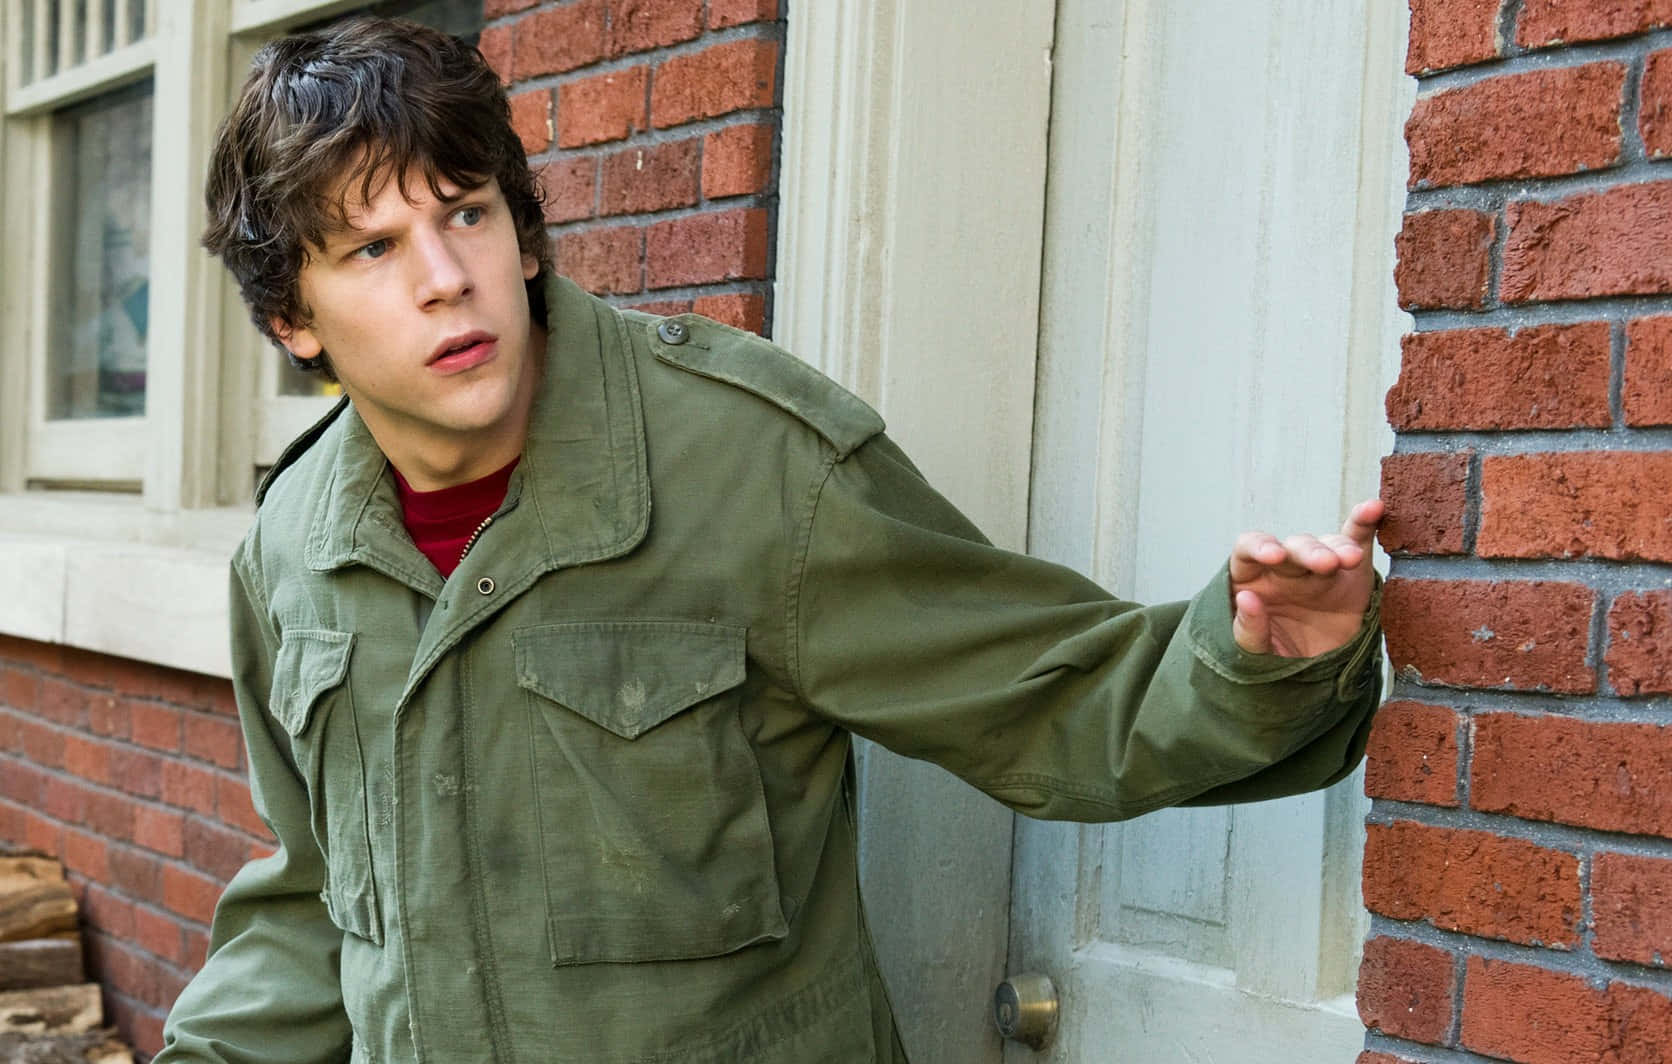 Hollywood actor Jesse Eisenberg looking dashing in a casual outfit Wallpaper